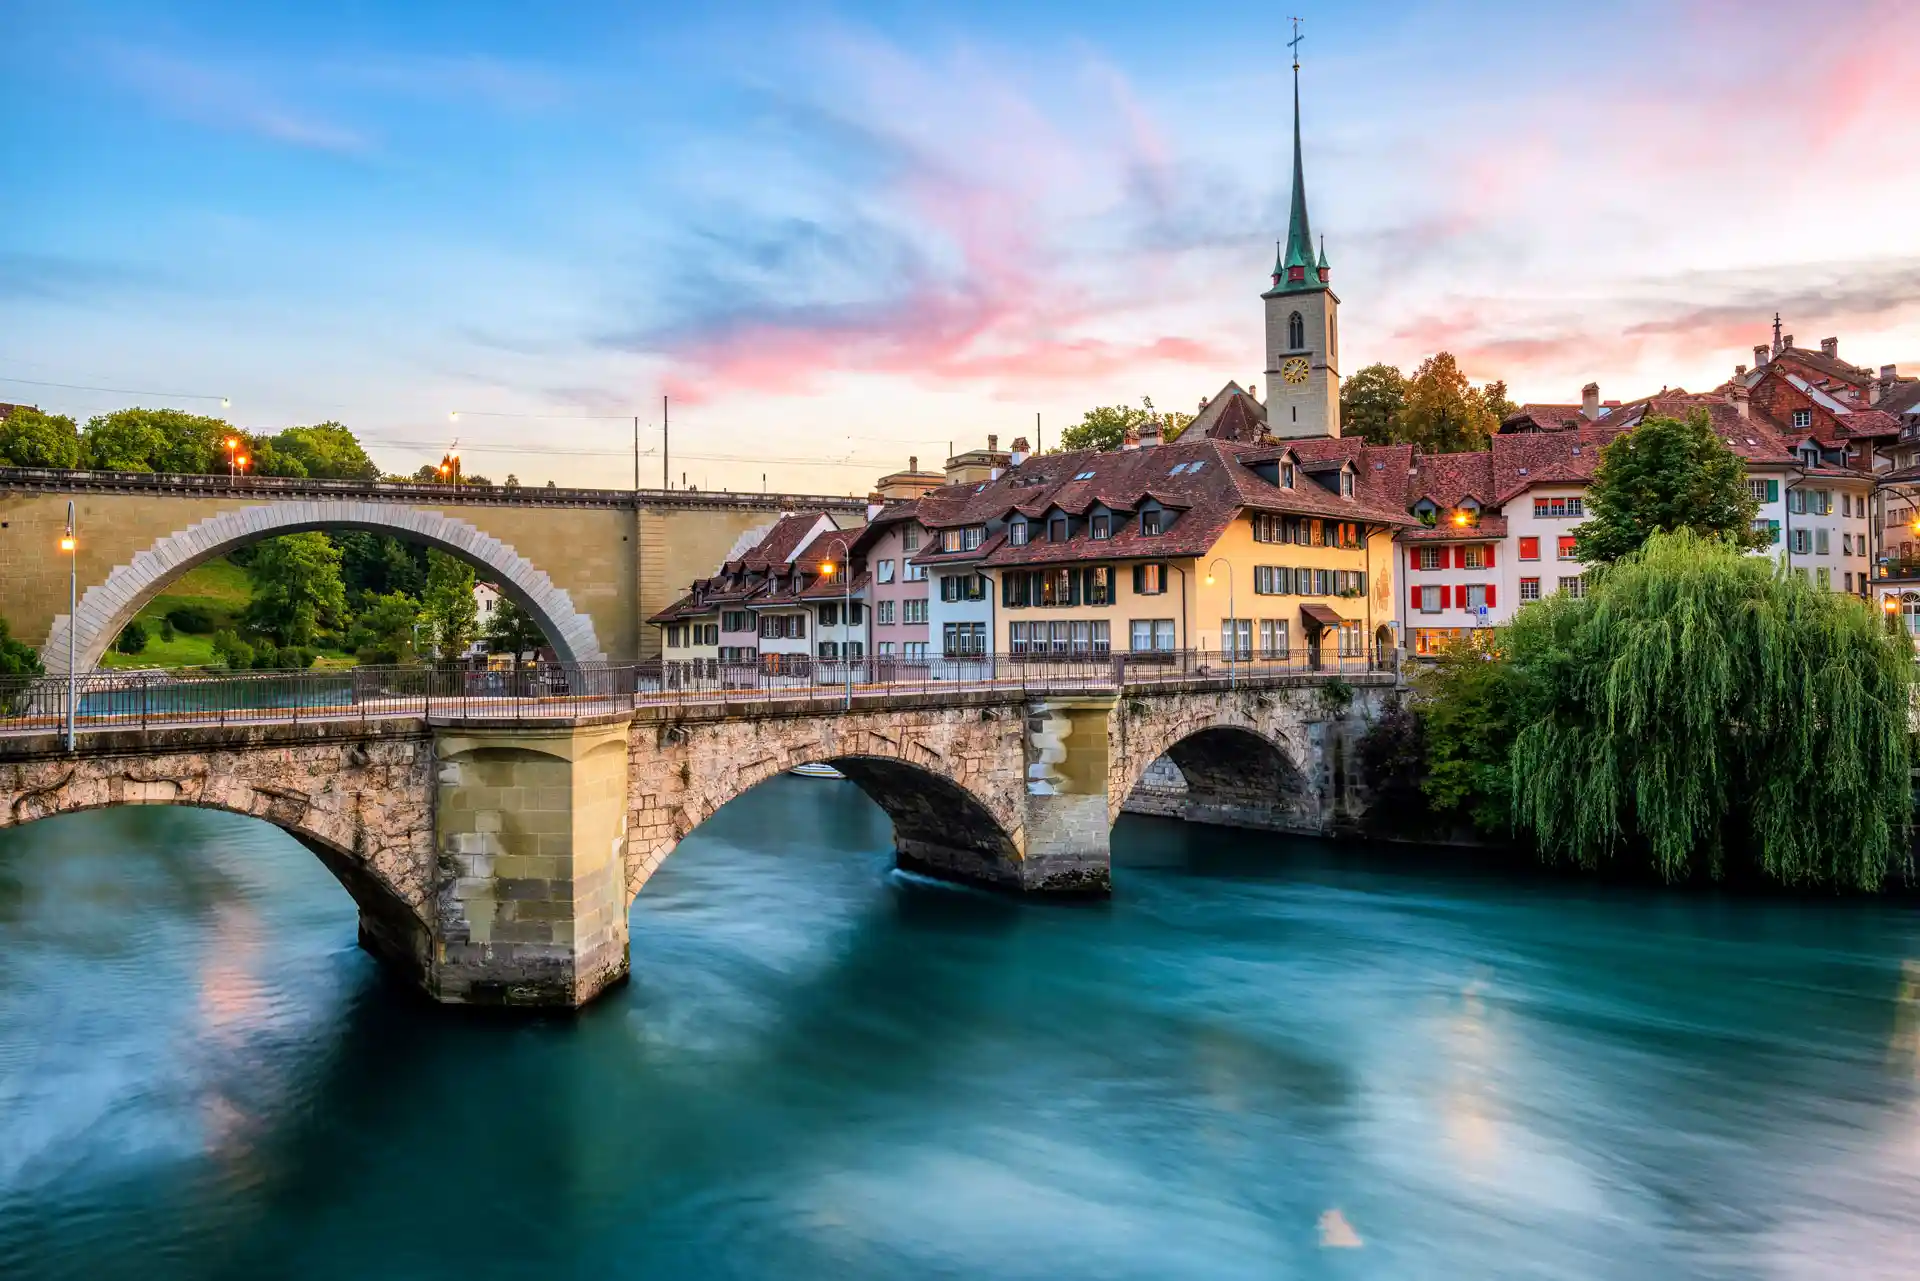 Historical Old Town of Bern